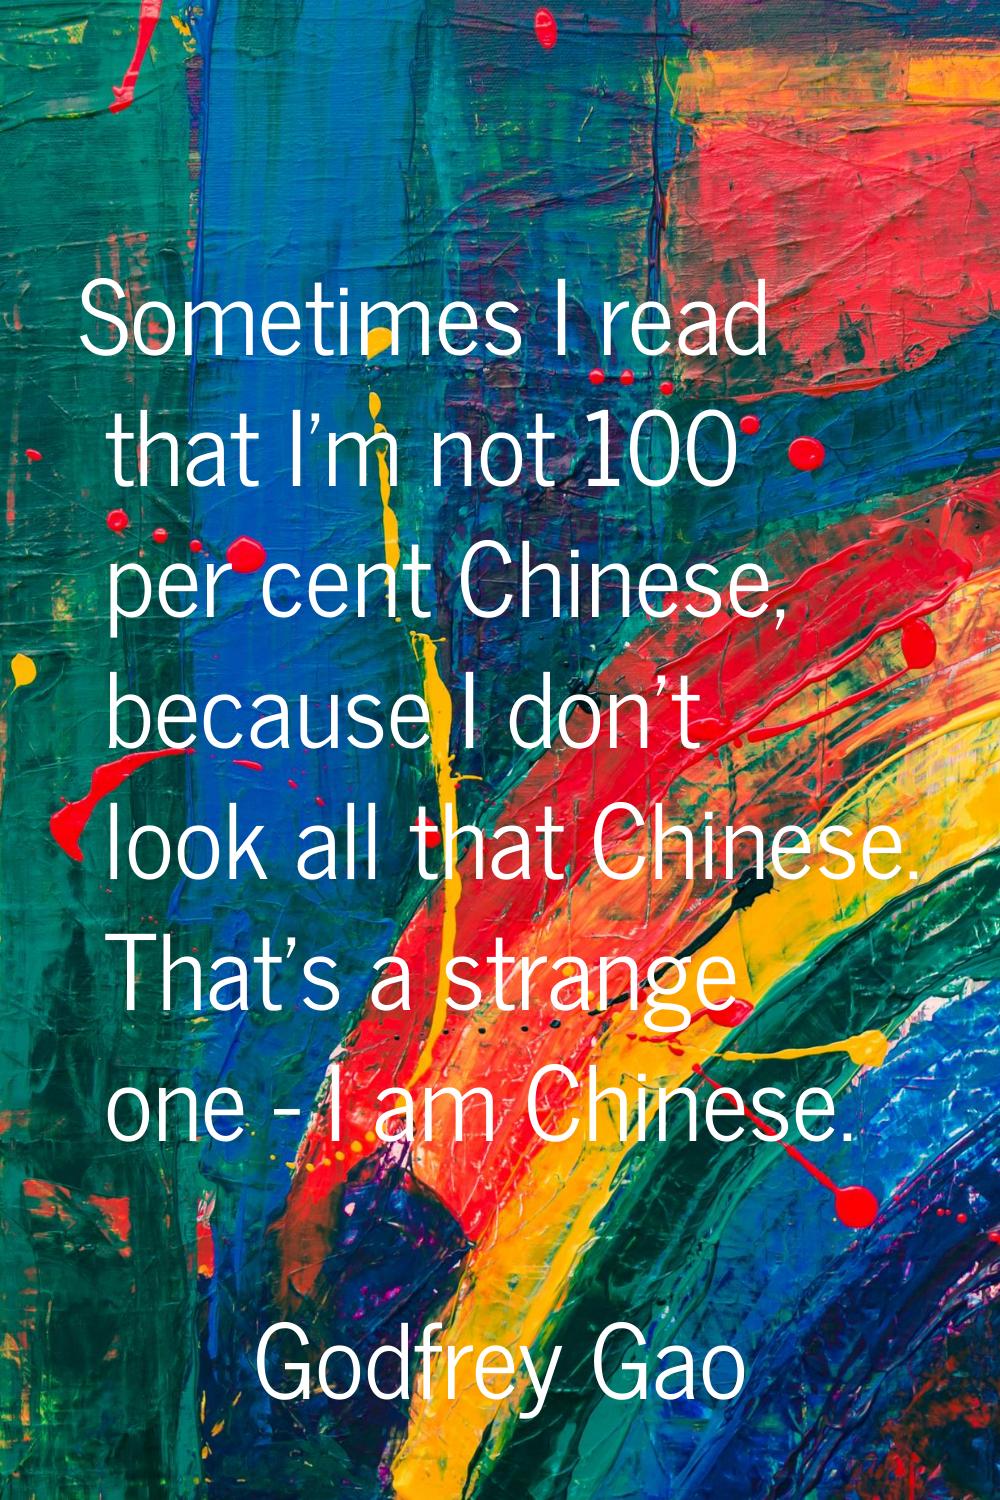 Sometimes I read that I'm not 100 per cent Chinese, because I don't look all that Chinese. That's a